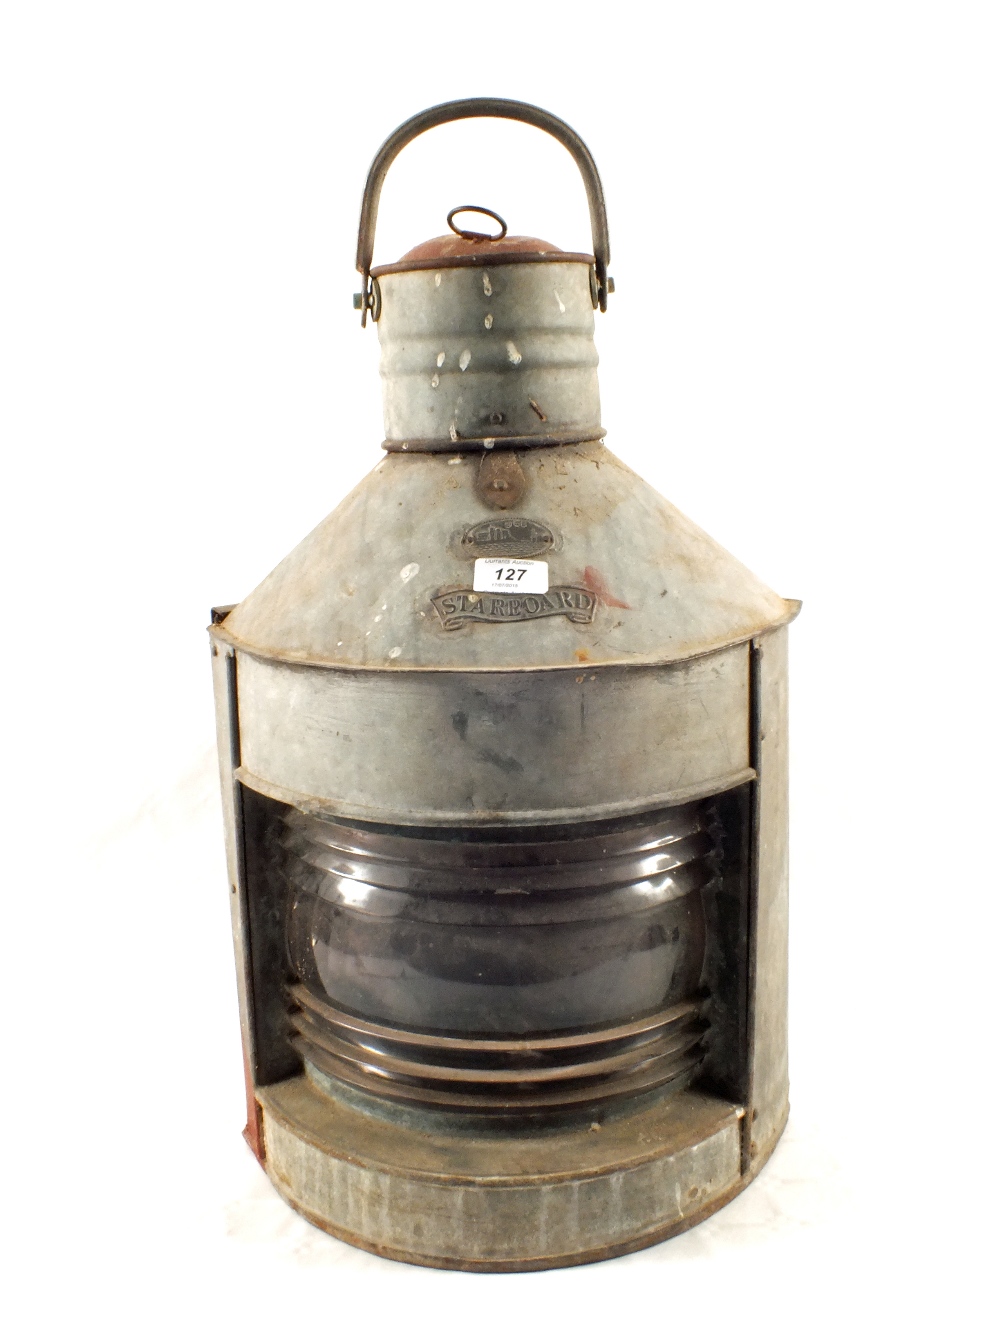 A galvanised ship's starboard lamp